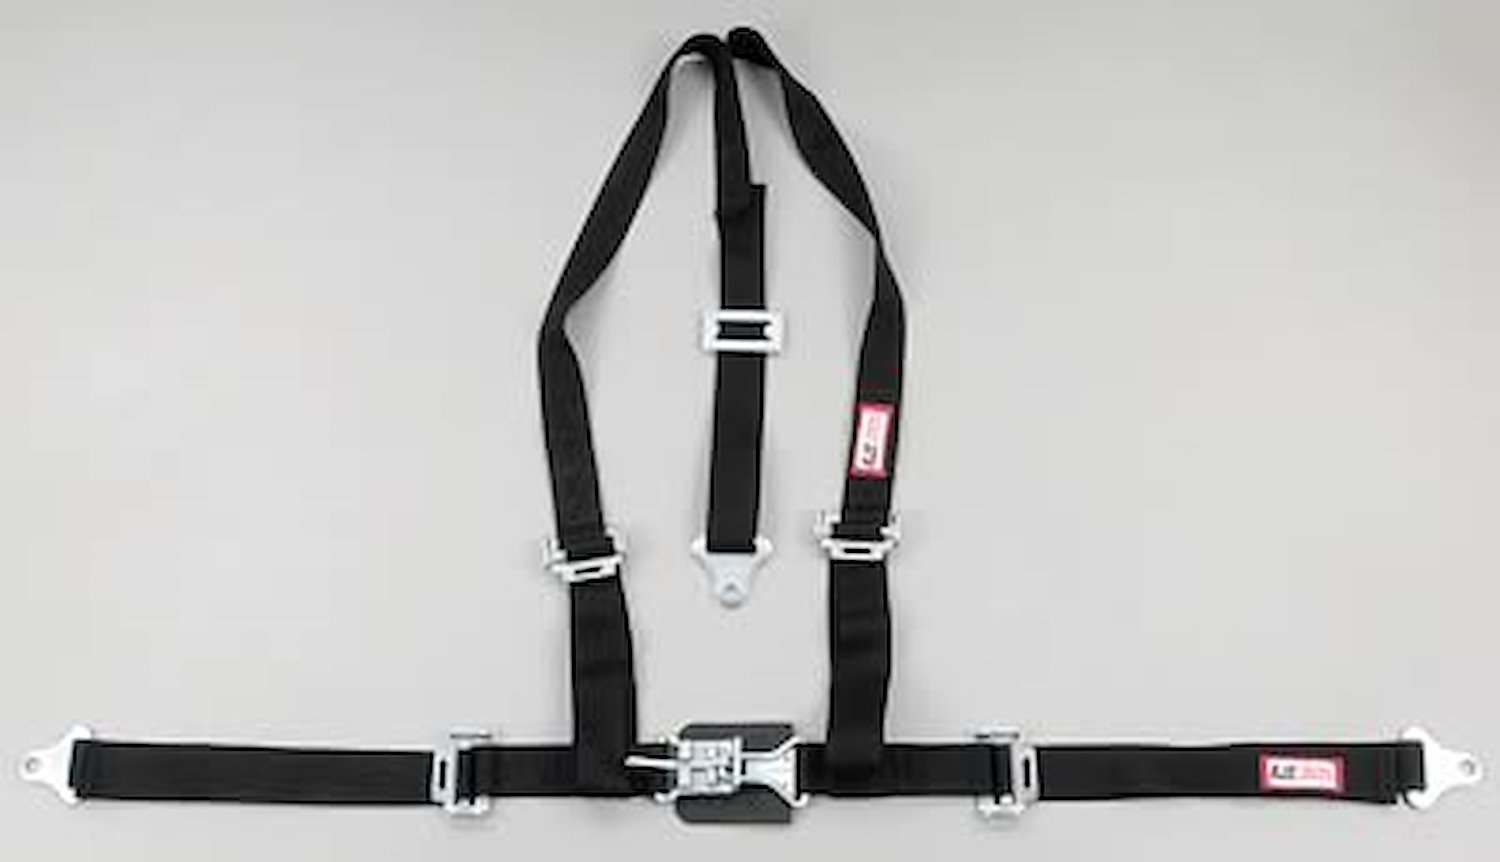 NON-SFI L&L HARNESS 2 PULL UP Lap Belt SEWN IN 2 S.H. V ROLL BAR Mount w/STERNUM STRAP ALL SNAP ENDS HOT PINK